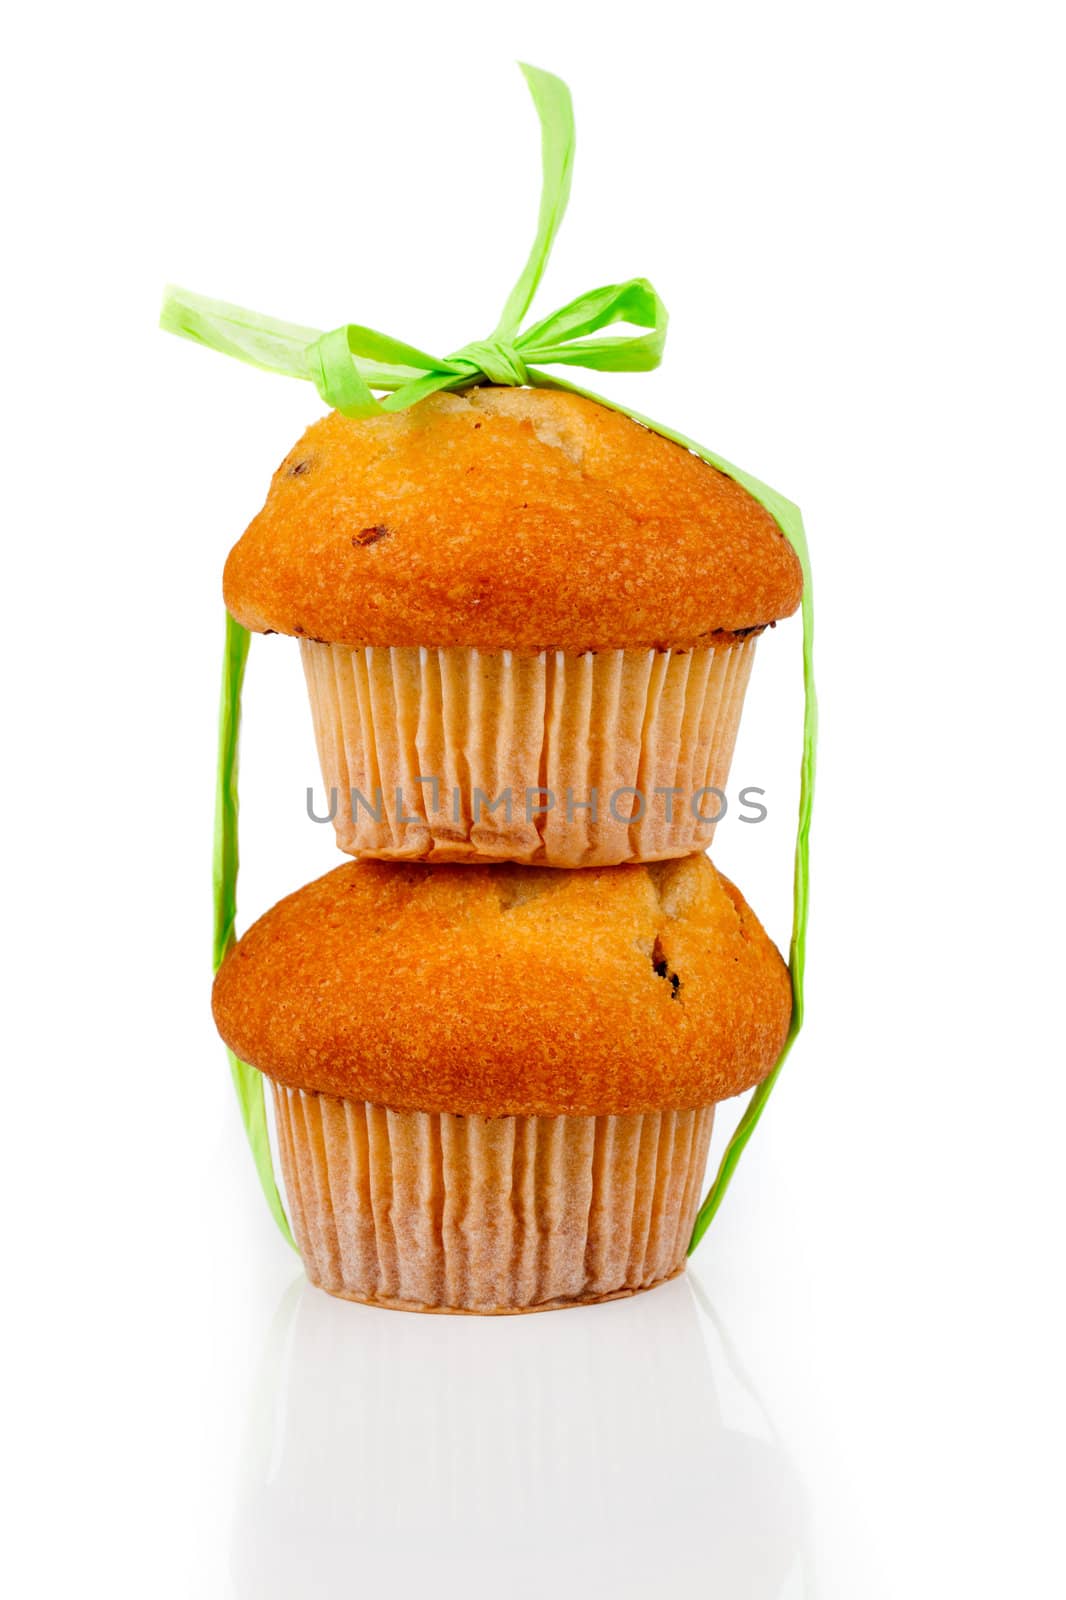 muffins connected by a green tape, on a white background